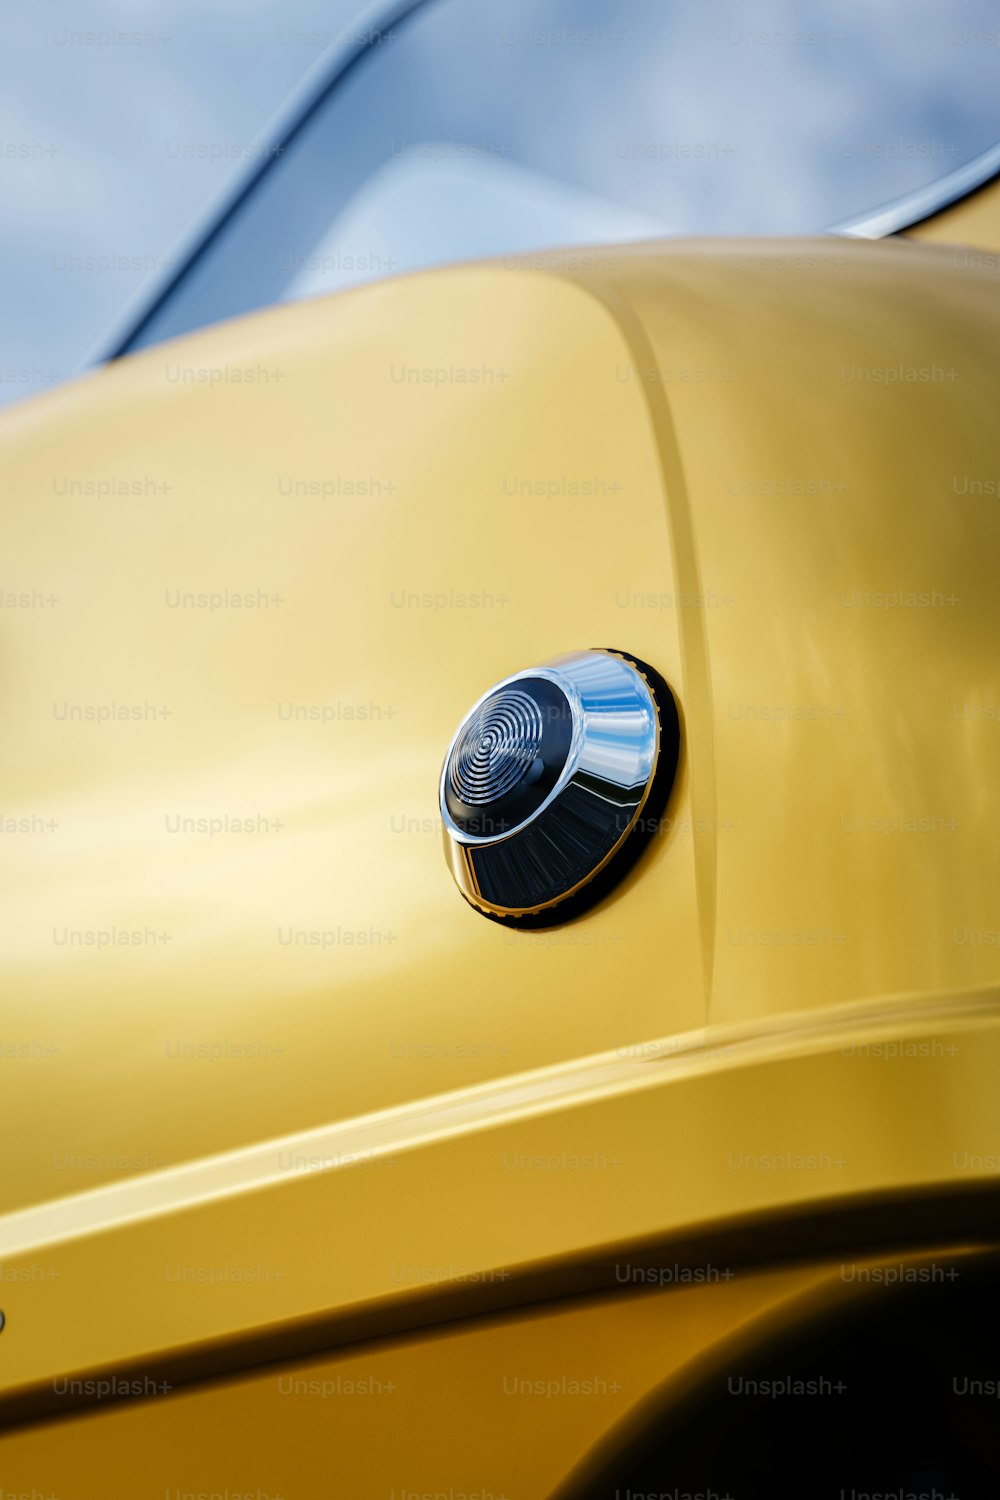 a close up of the emblem on a yellow car